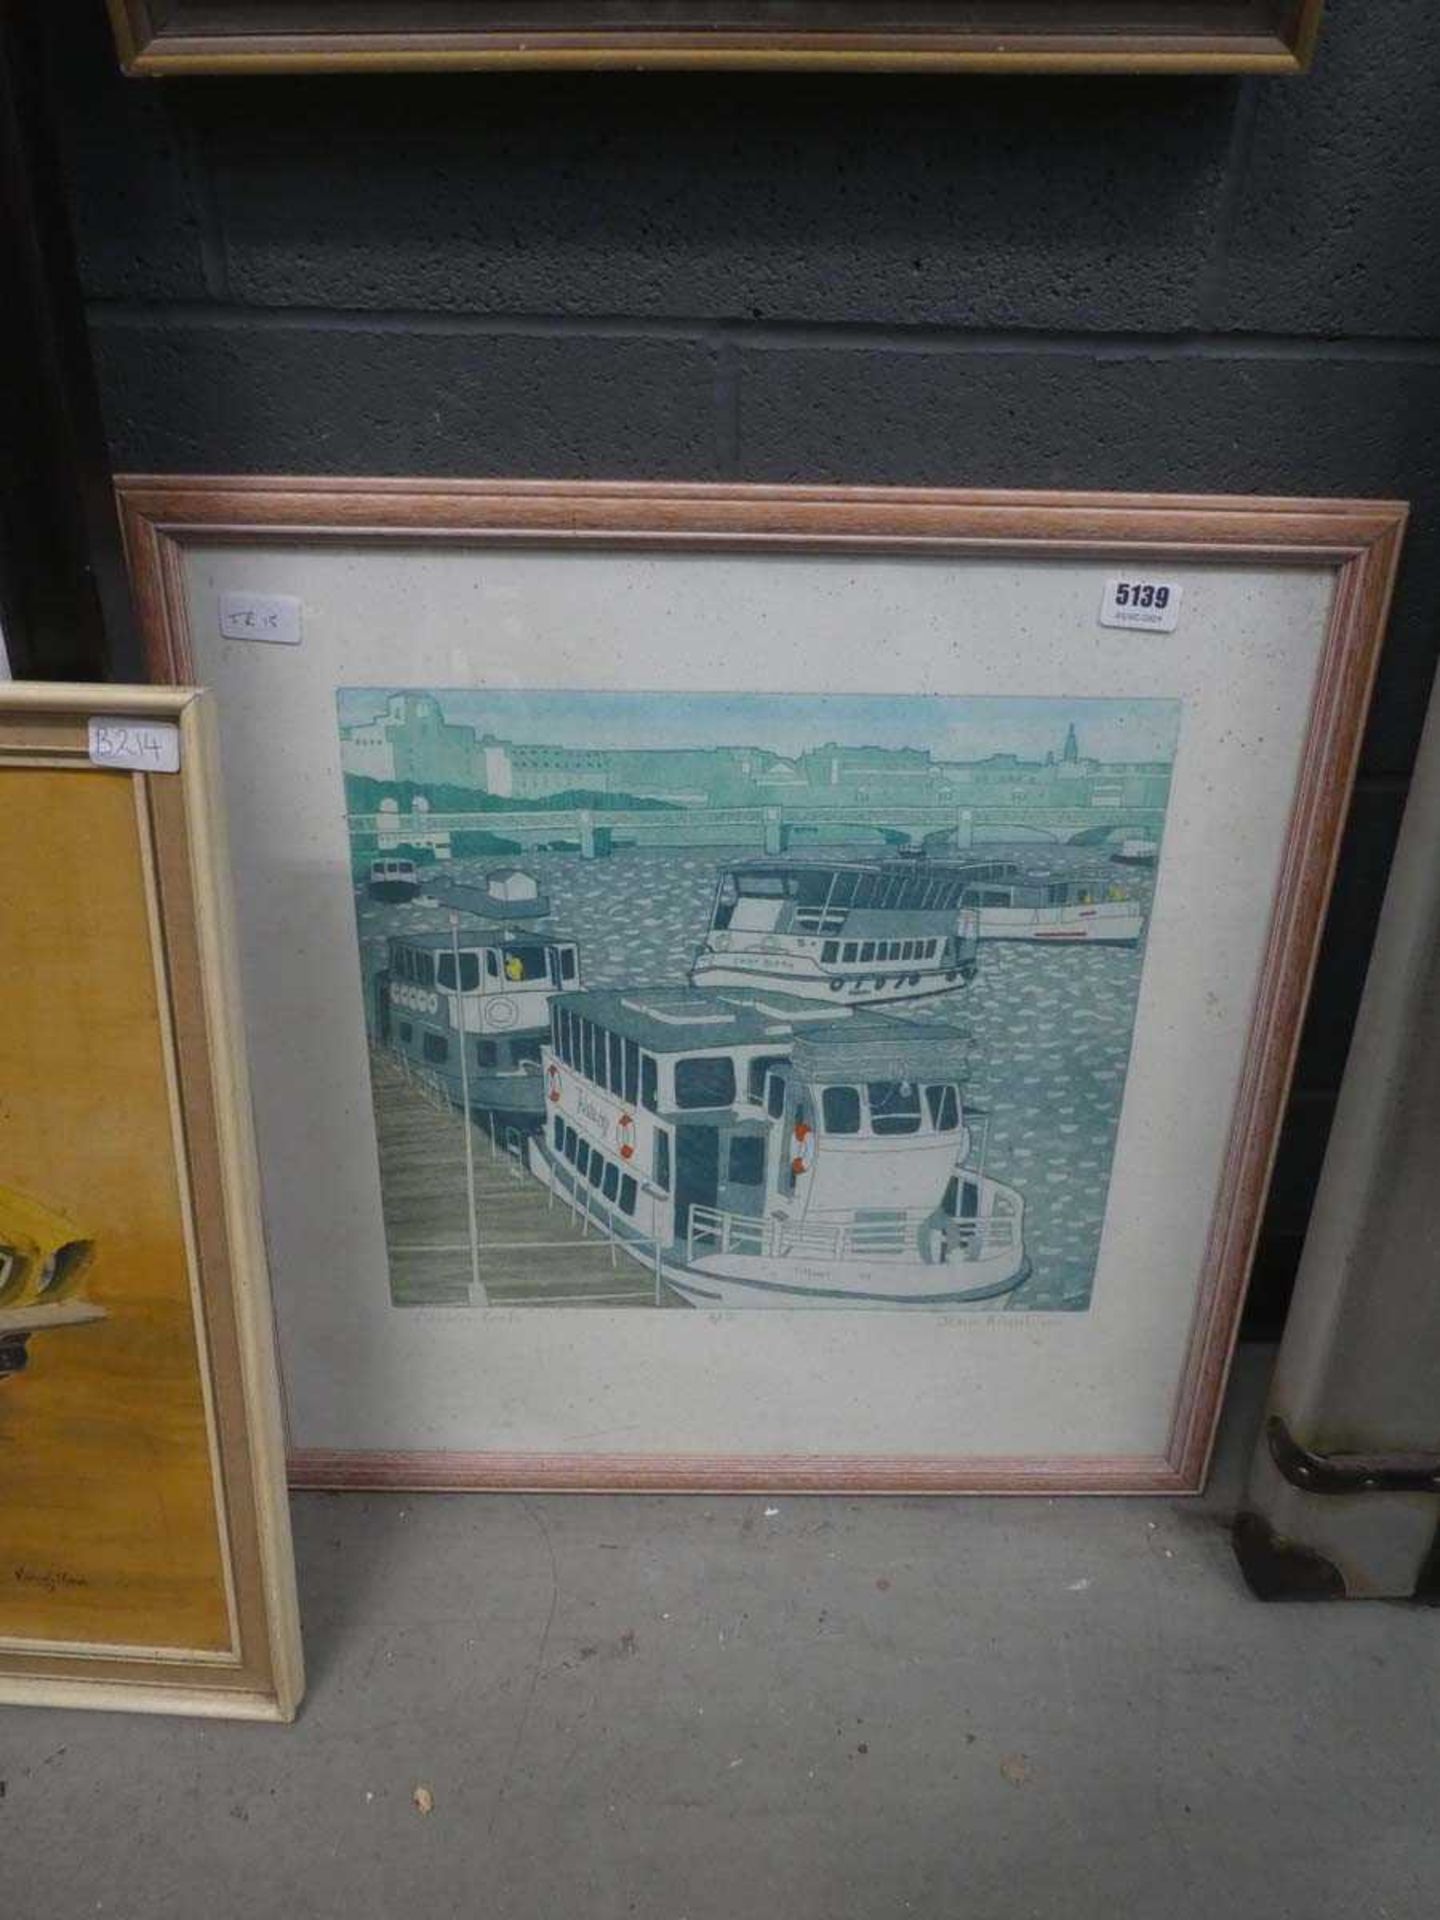 Limited edition etching by John Brunsdon of boats at dock